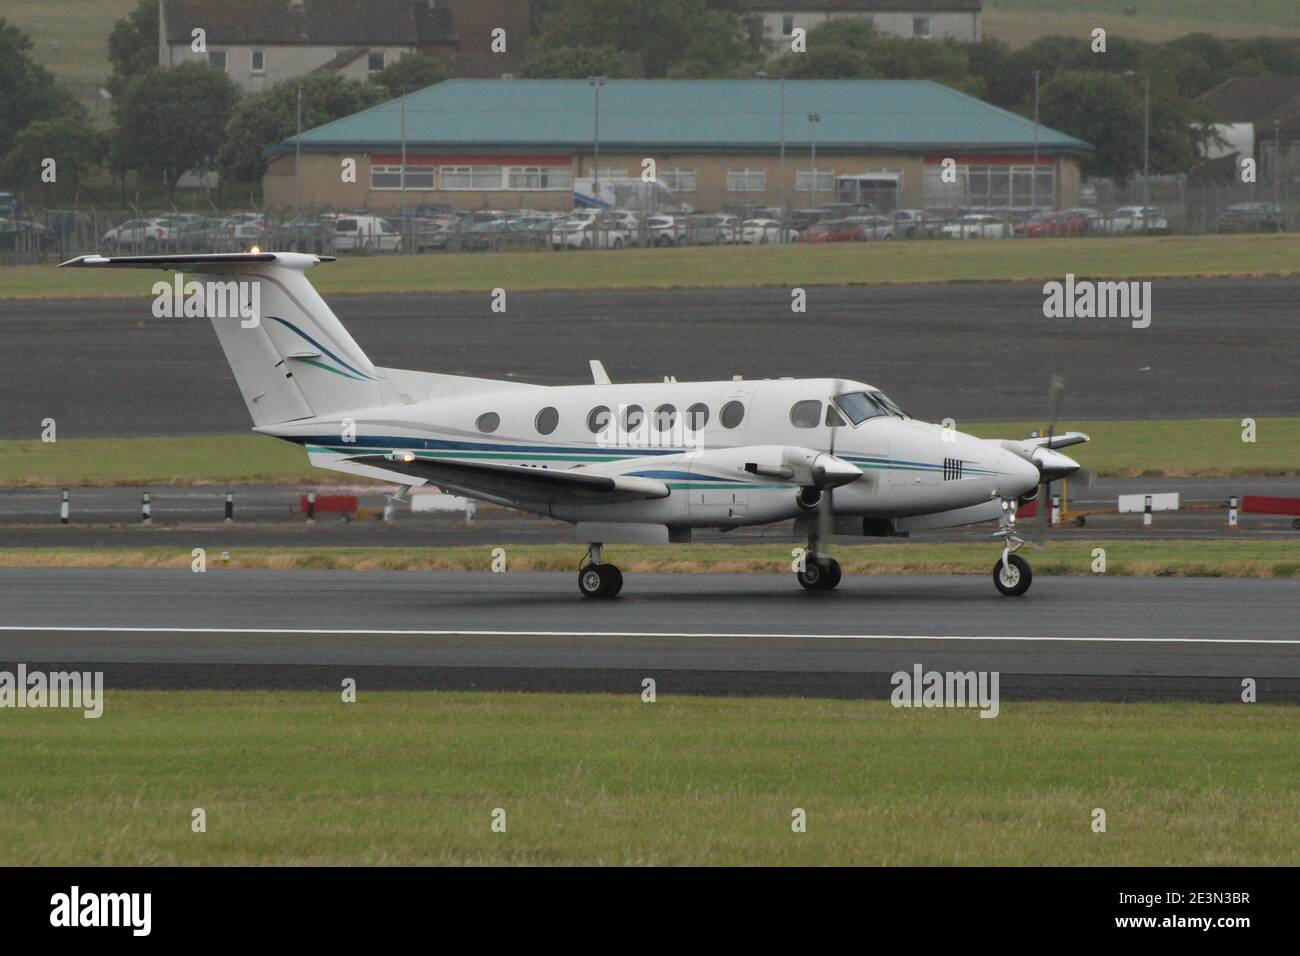 G-IASM, a Beechcraft B200 Super King Air operated by 2Excel Aviation/Broadsword Aviation, departing from Prestwick International Airport in Ayrshire. Stock Photo